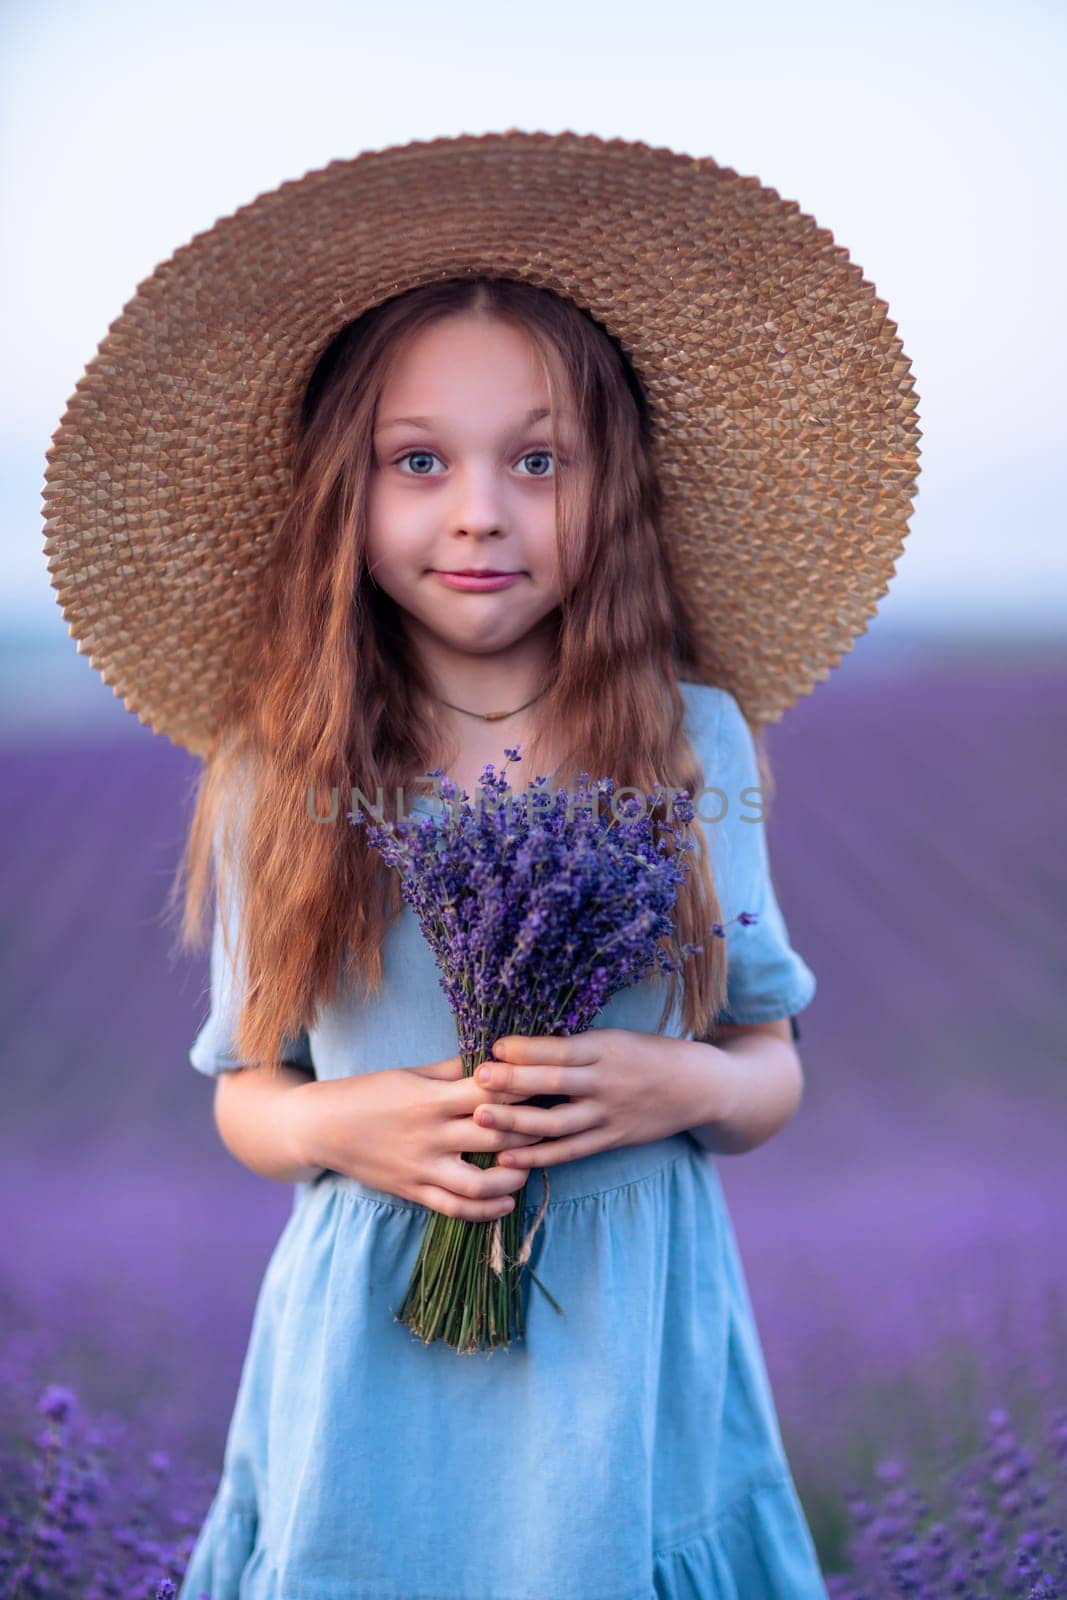 Girl lavender field in a blue dress with flowing hair in a hat stands in a lilac lavender field by Matiunina